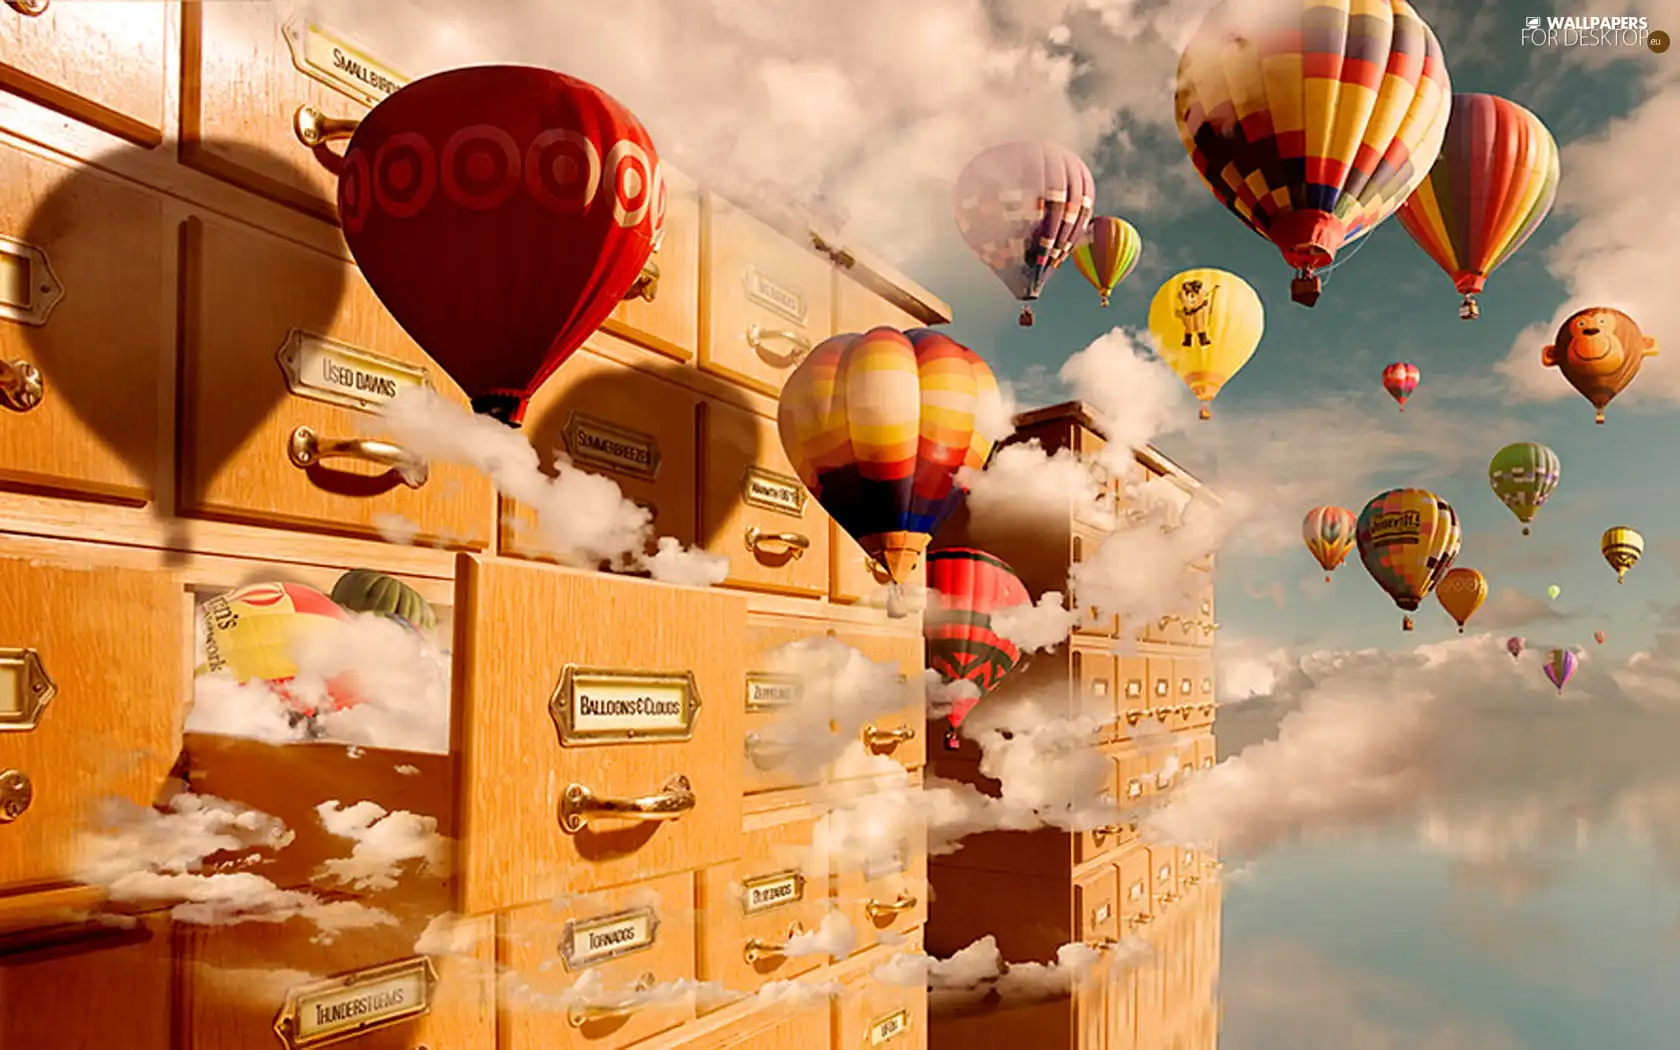 Balloons, Drawers, clouds